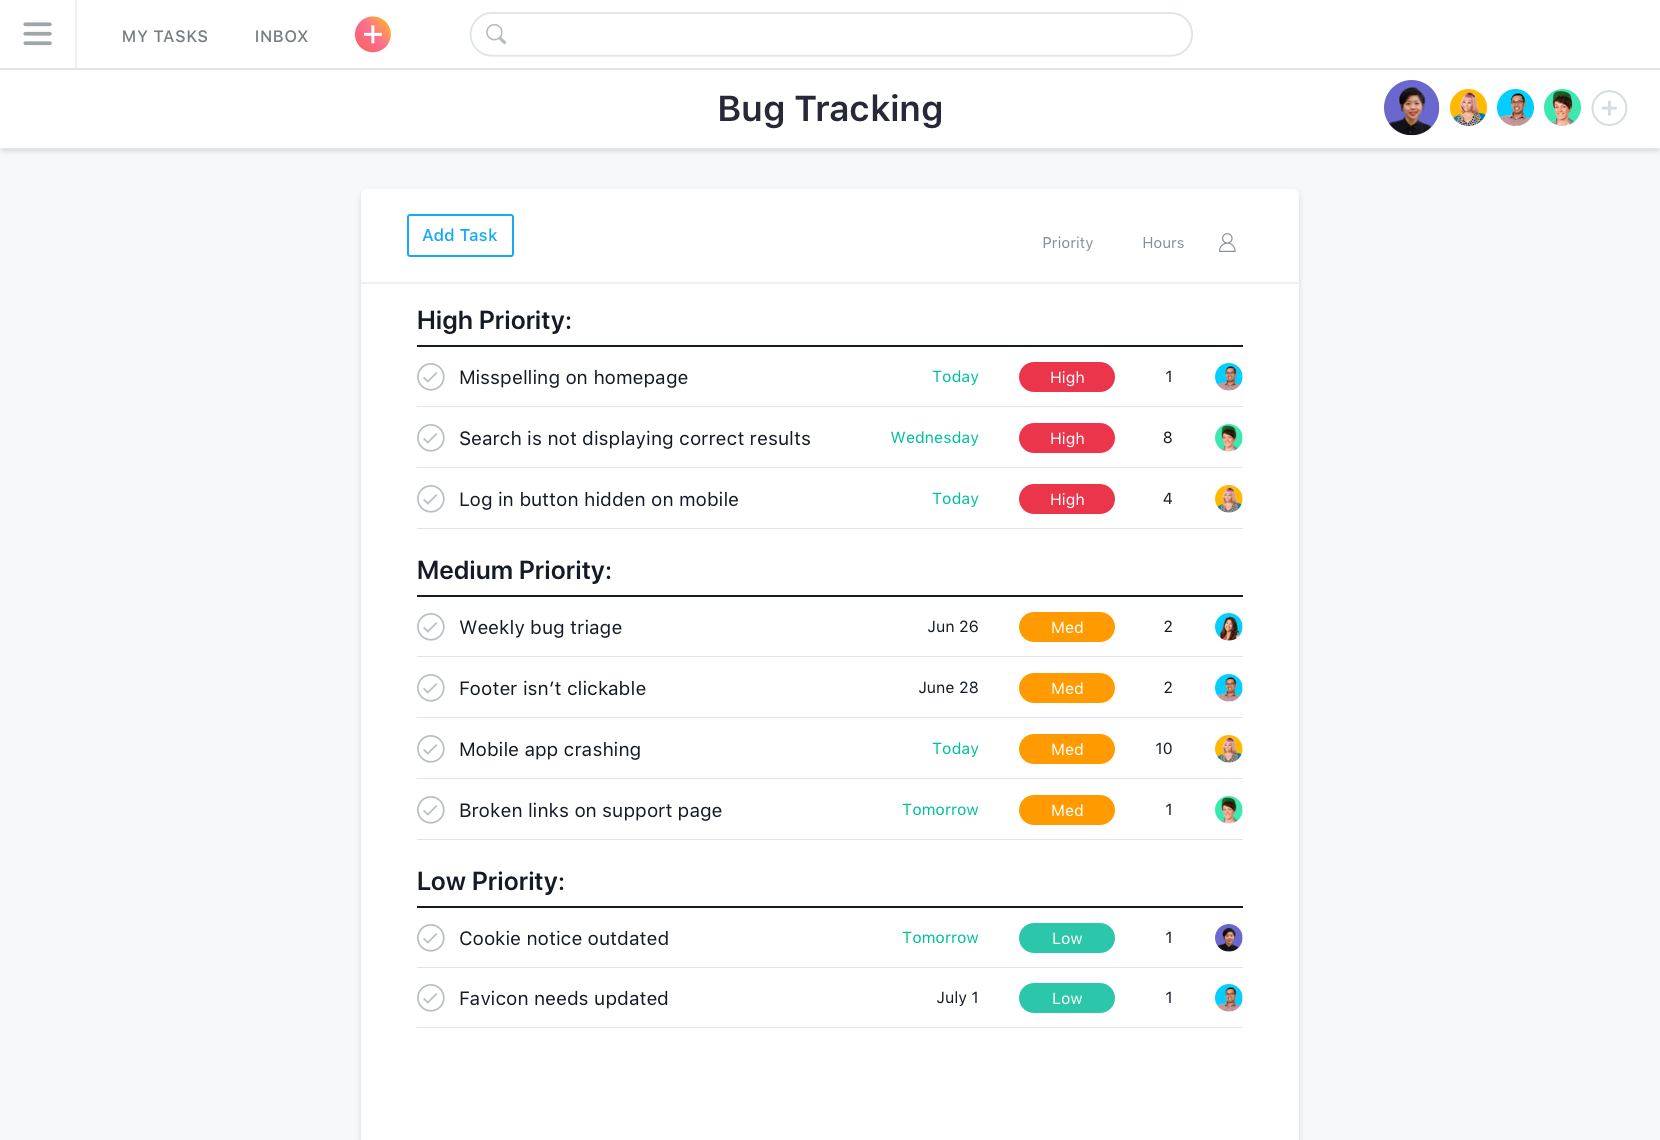 Track and squash bugs faster with Asana’s agile management software